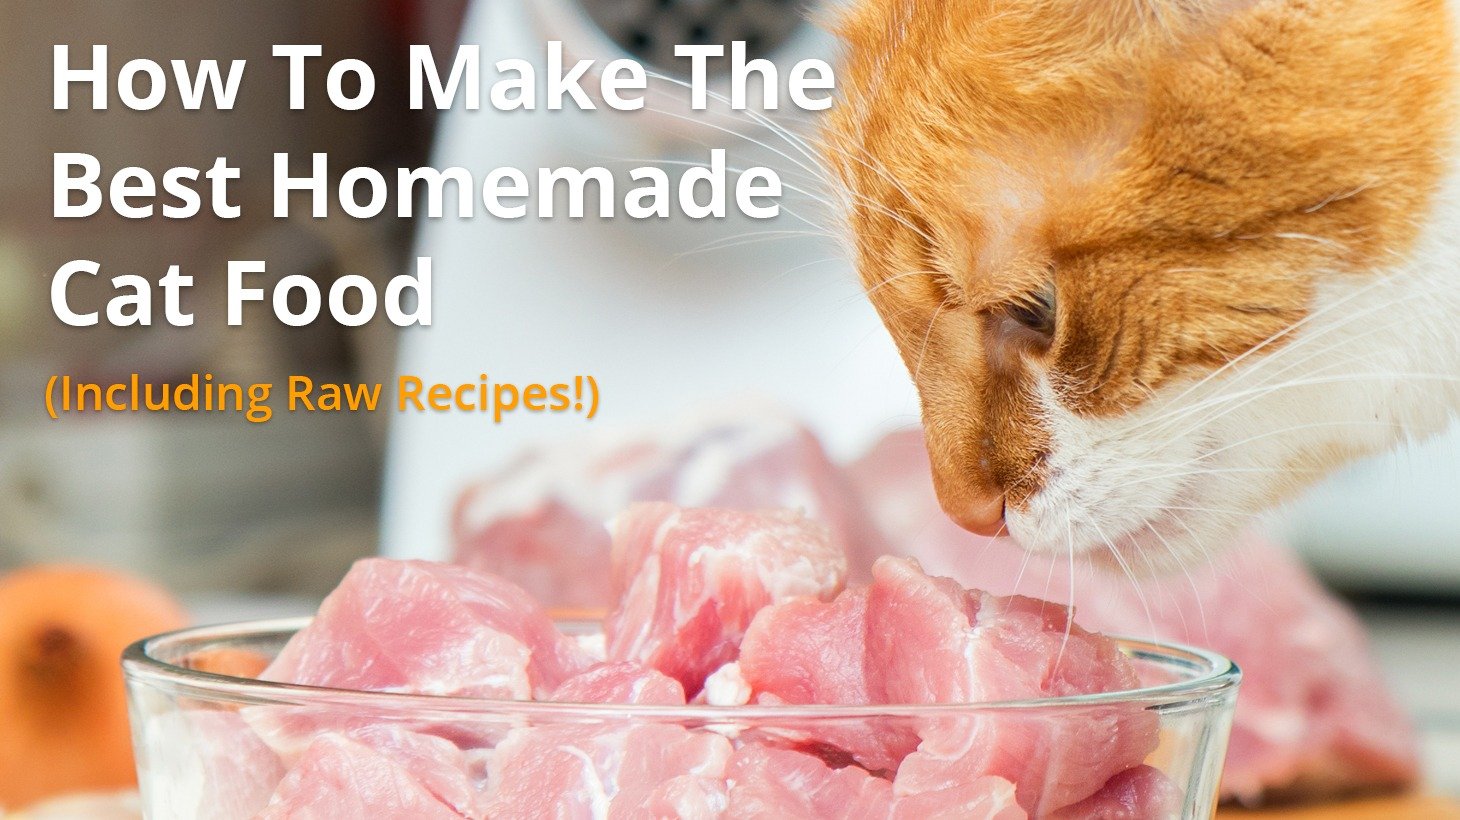 Homemade Cat Food and Raw Diet Recipes